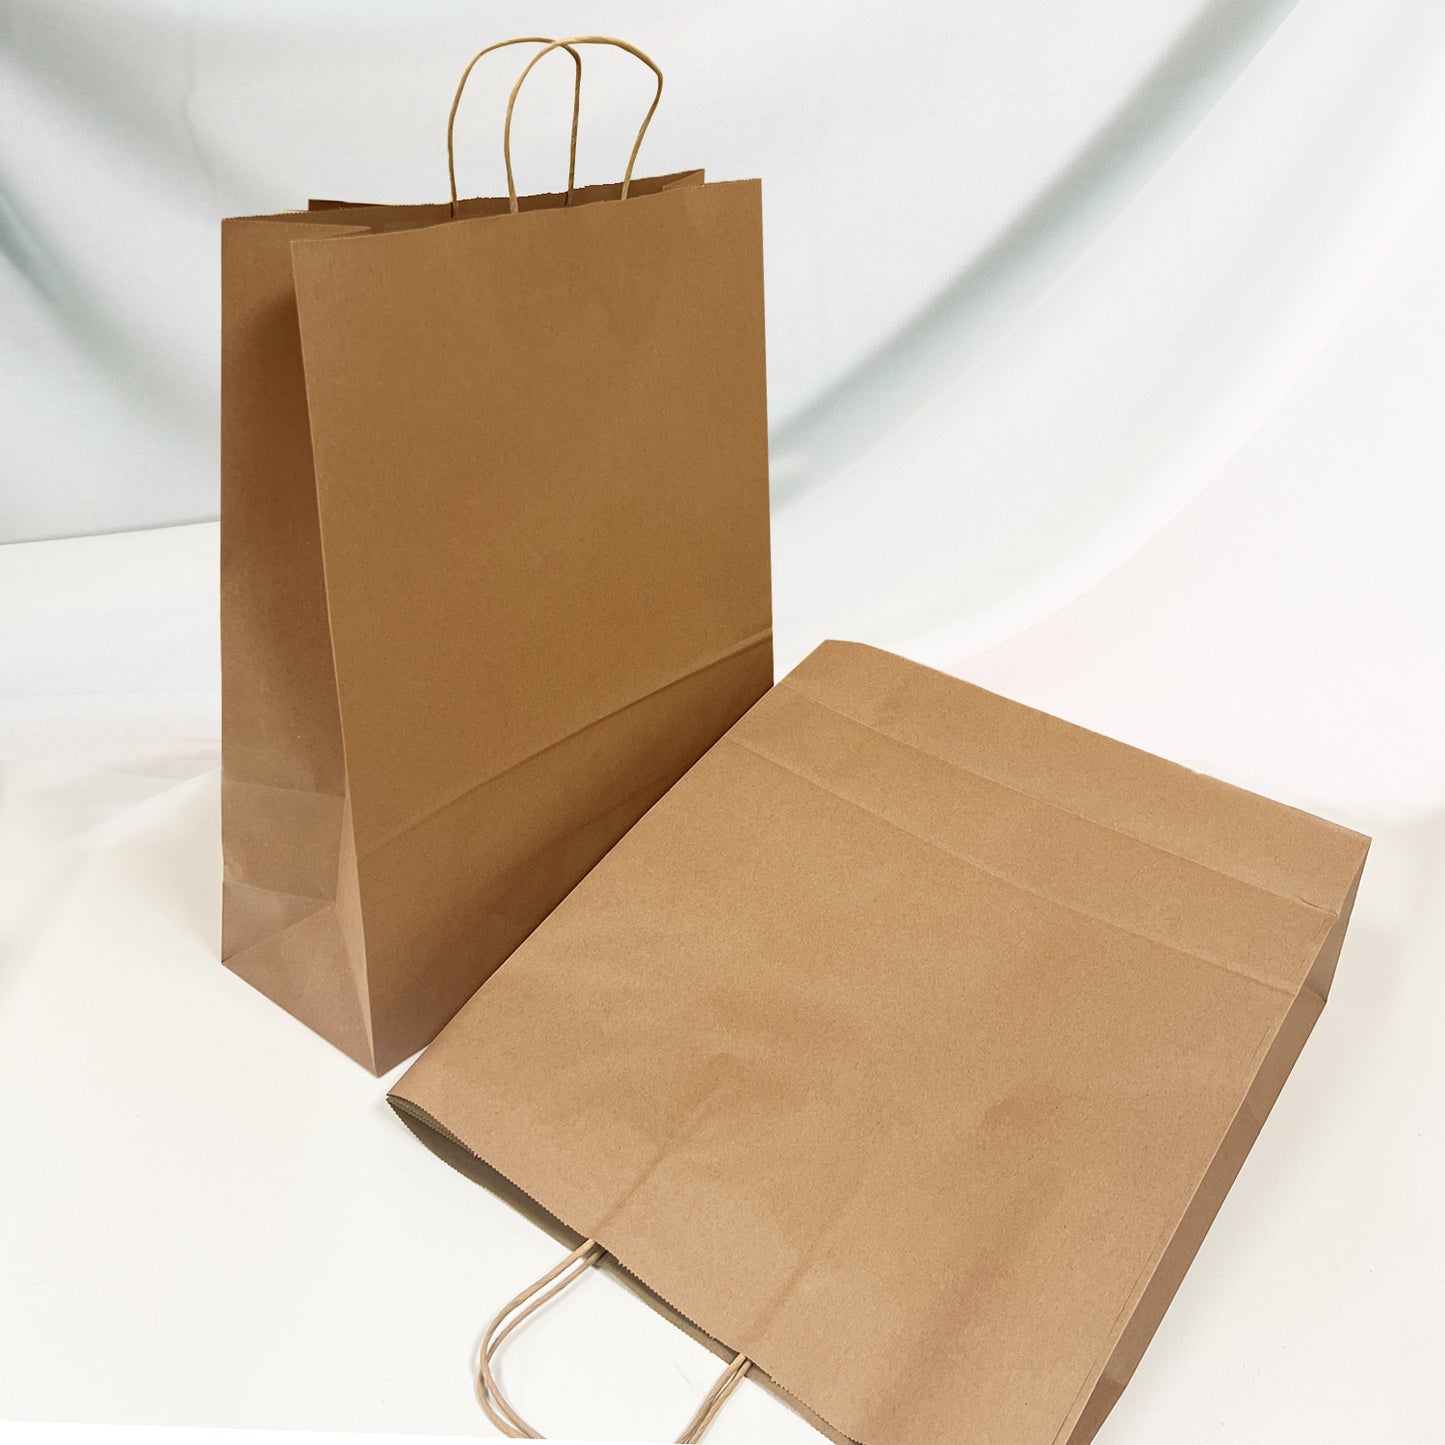 200 Pcs, Queen, 16x6x19.25 inches, Kraft Paper Bags, with Twisted Handles